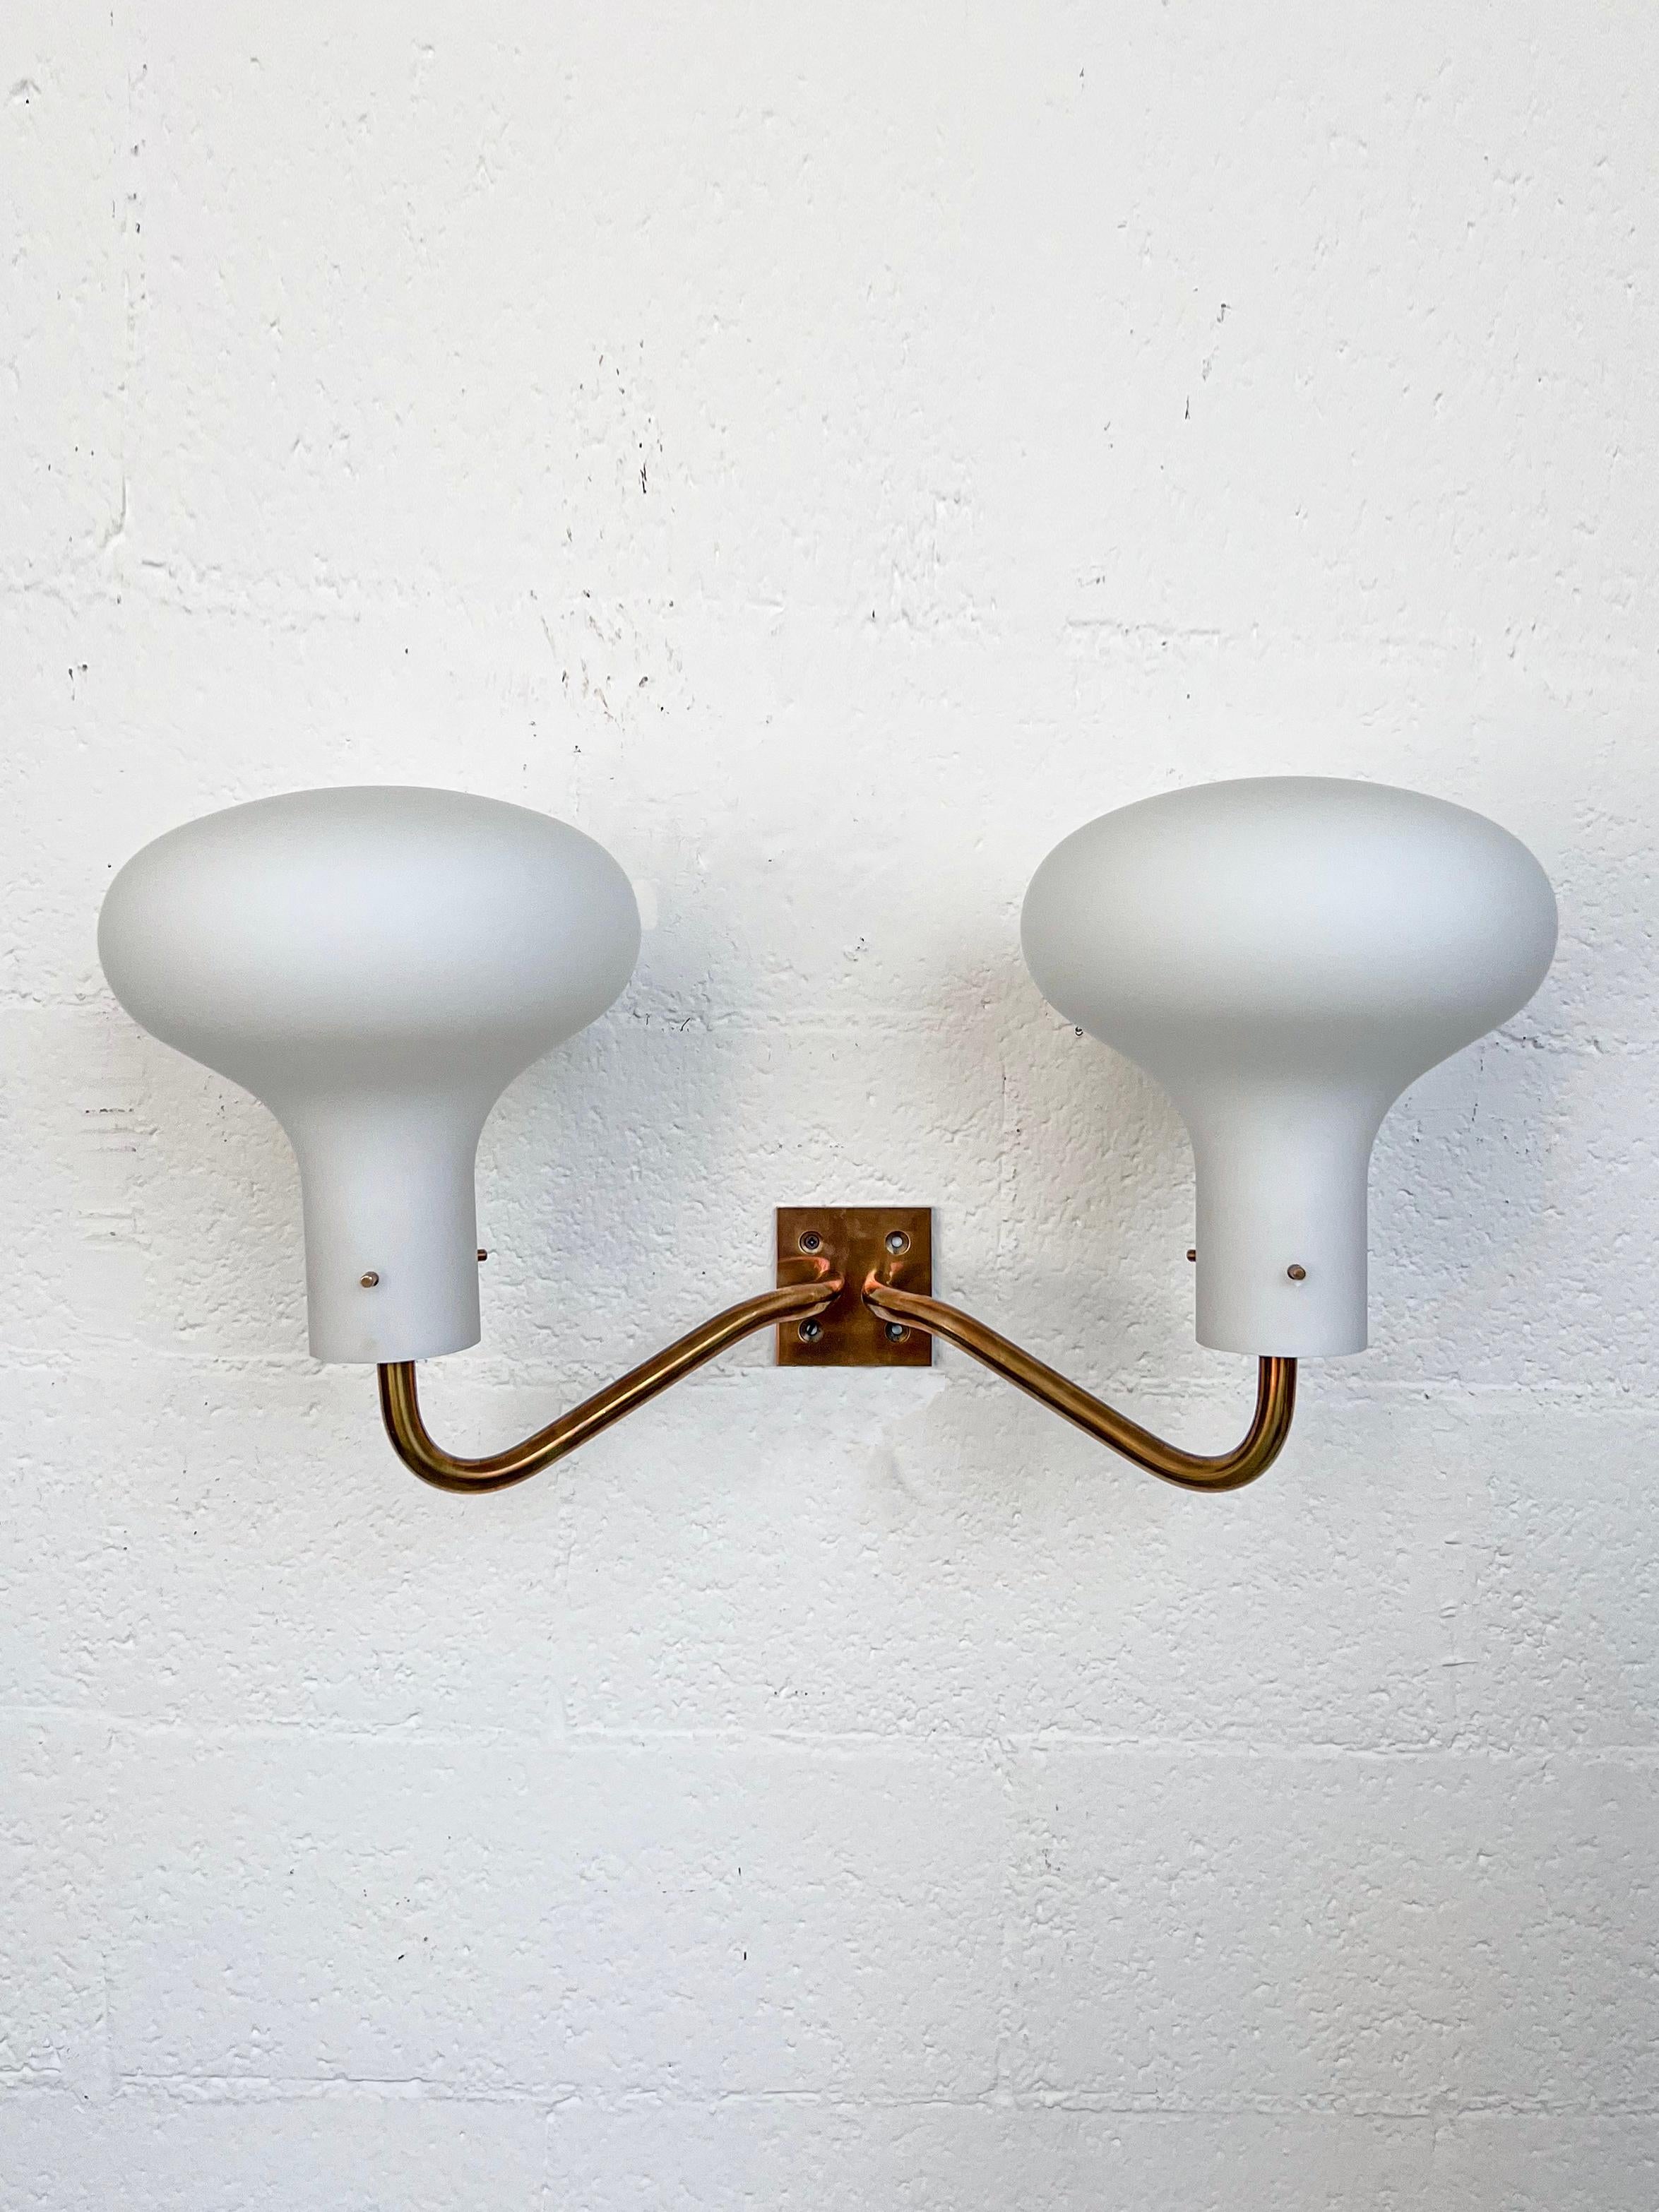  Vintage Italian LP12 sconce by Ignazio Gardella, brass frame and opaline glass mushroom-shaped lightshades. Some collectors indeed nickname these lamps 